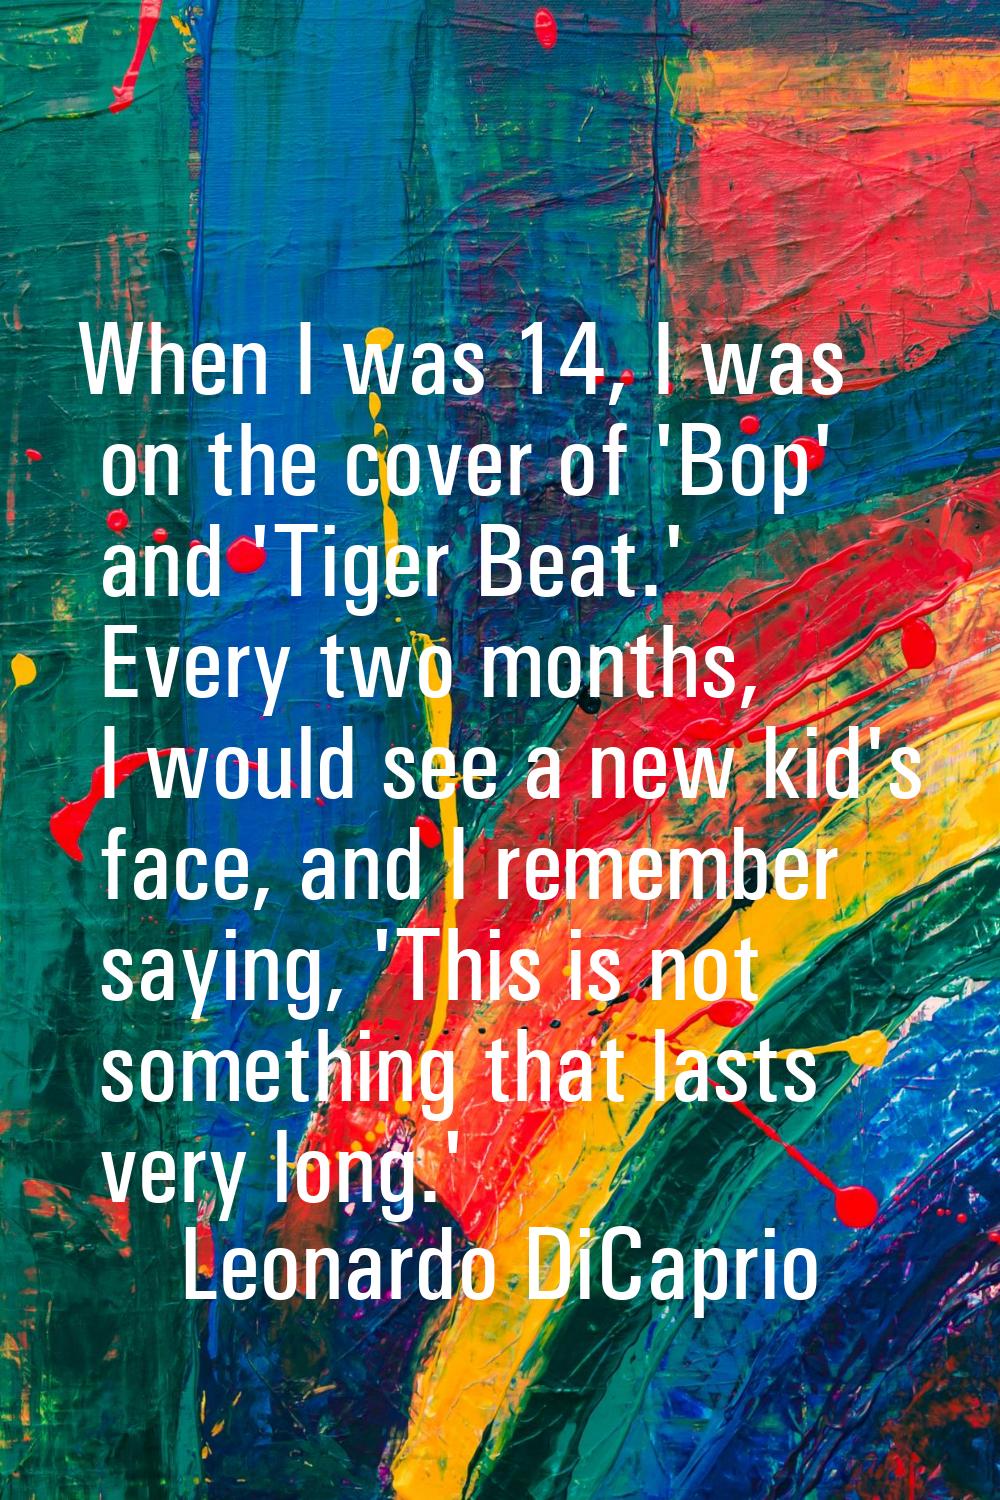 When I was 14, I was on the cover of 'Bop' and 'Tiger Beat.' Every two months, I would see a new ki